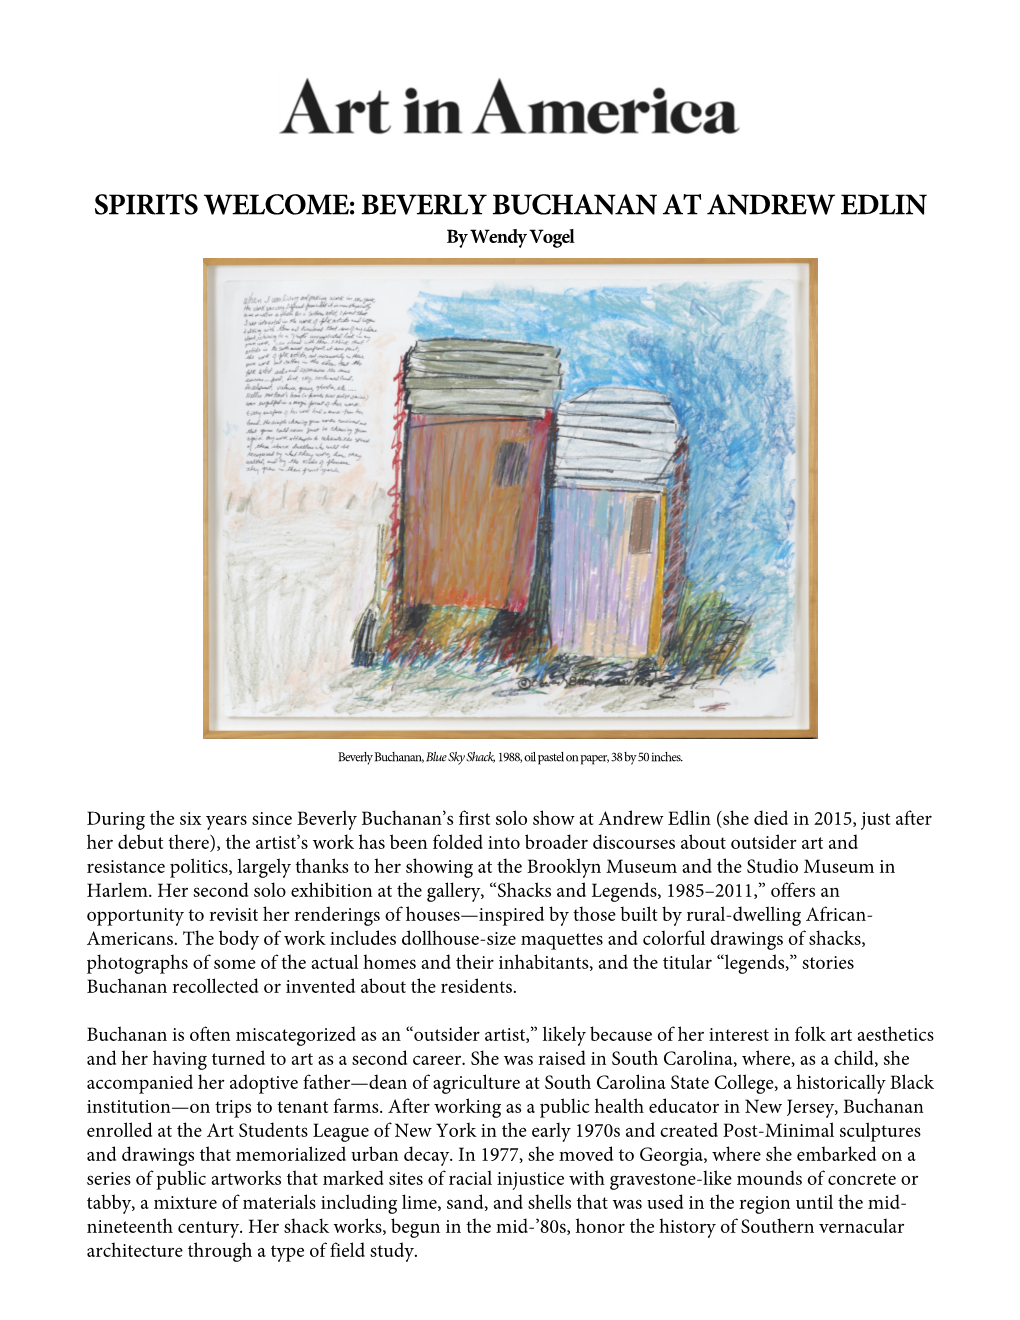 SPIRITS WELCOME: BEVERLY BUCHANAN at ANDREW EDLIN by Wendy Vogel